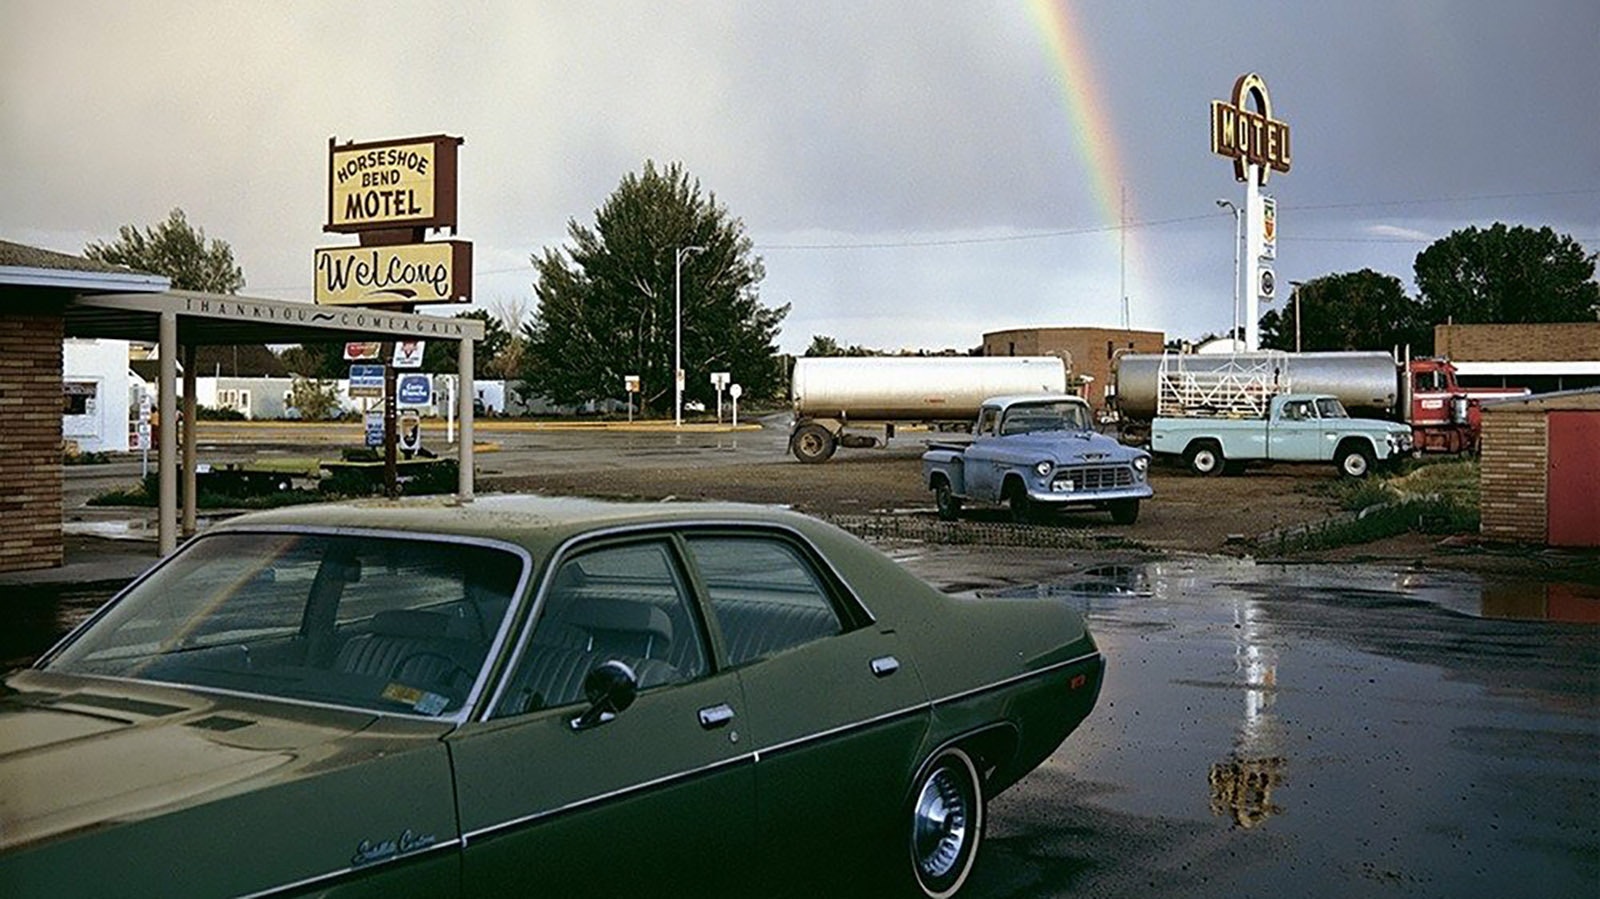 Stephen Shore's iconic 1973 photo of the Horseshoe Bend Motel, including its unique sign, hung in the Metropolitan Museum of Art in New York and is featured in his book, "Uncommon Places."